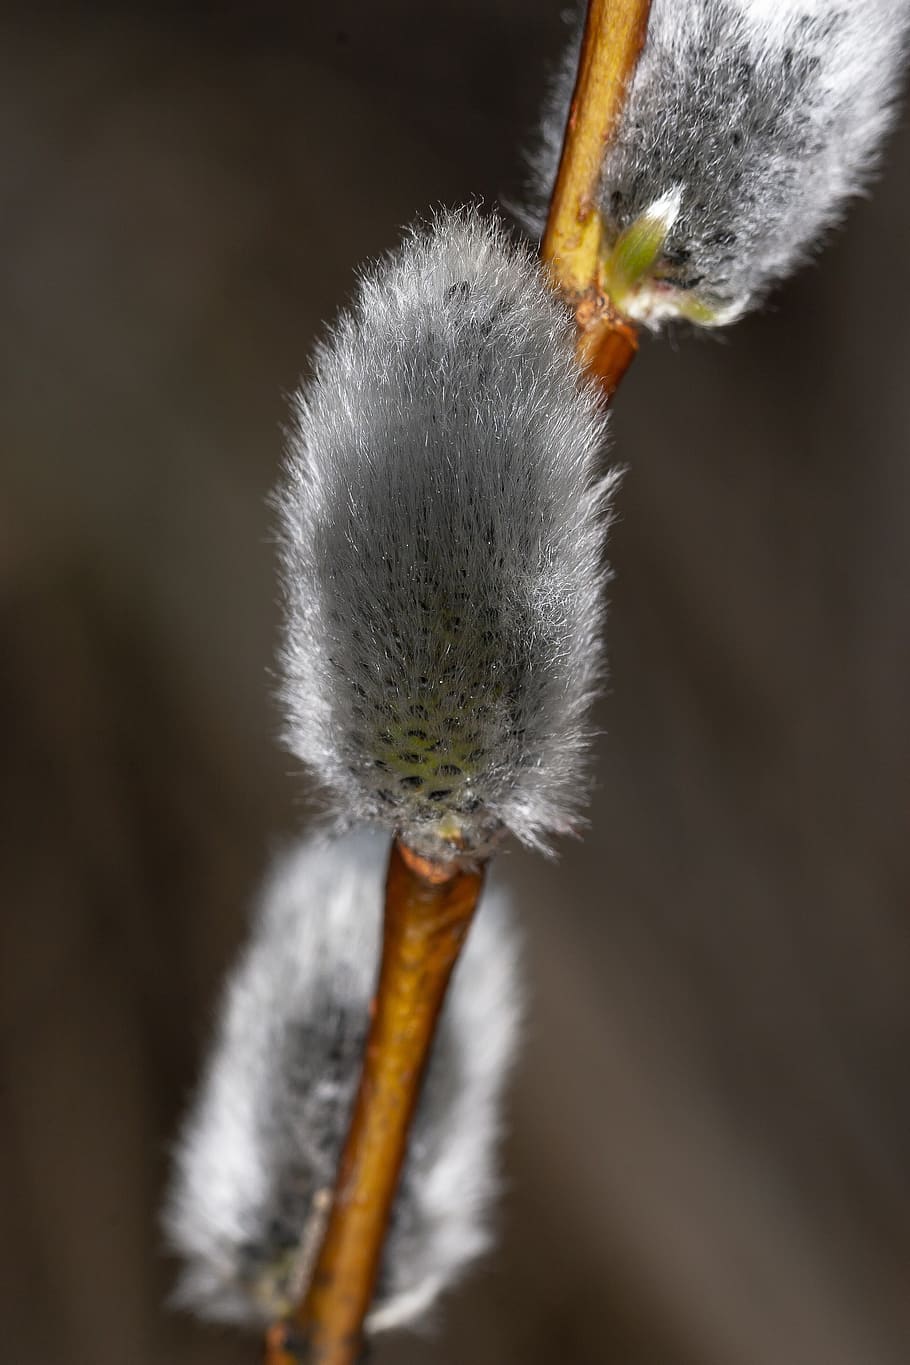 willow, pajunk, spring, nature, plant, bloom, close-up, flower